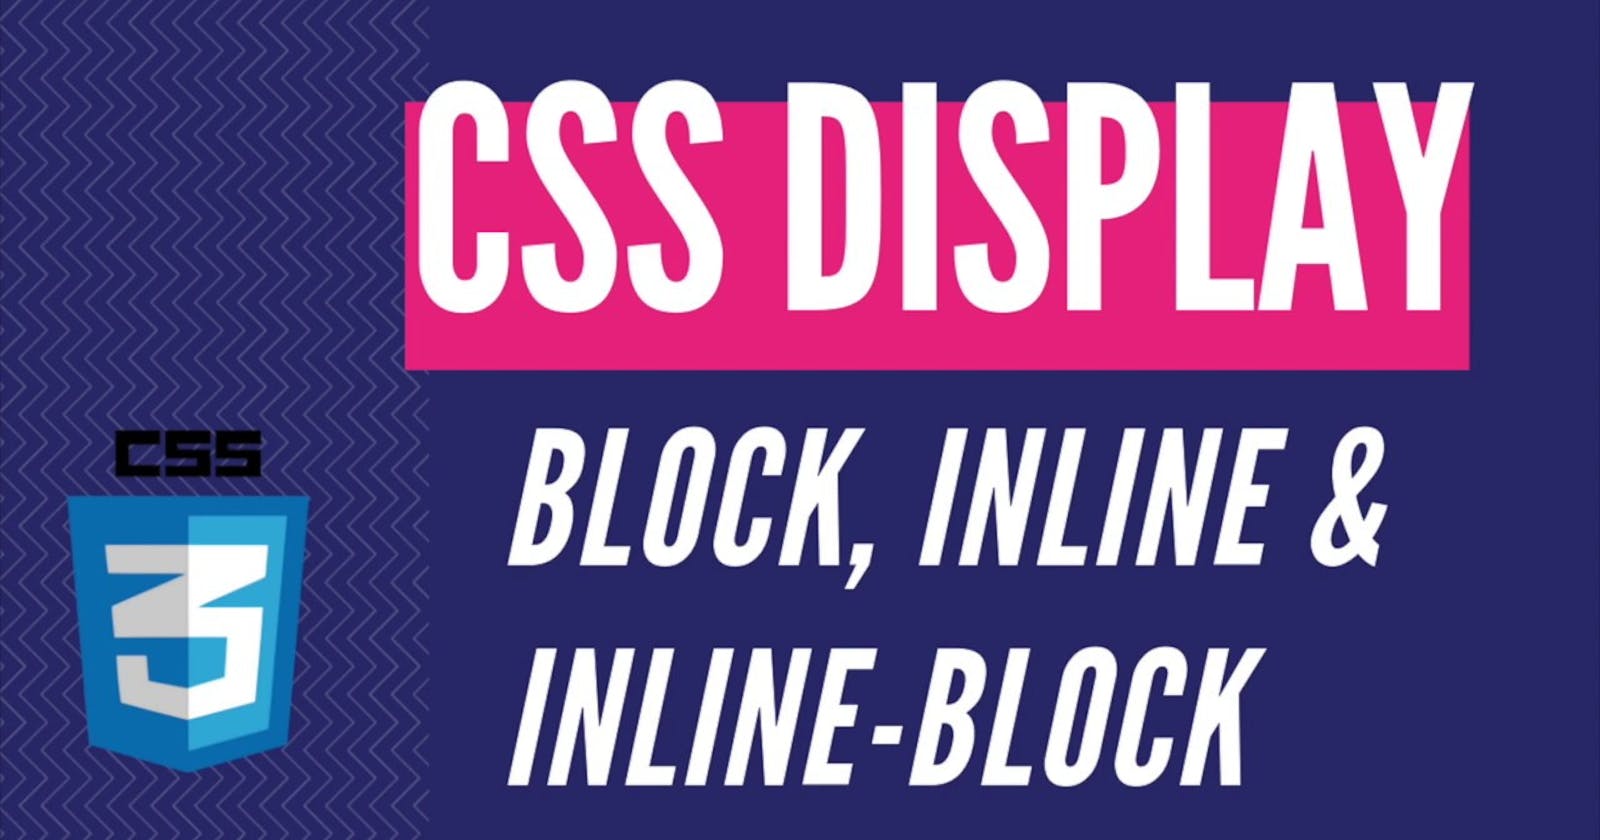 INLINE, BLOCK-LEVEL, AND INLINE-BLOCK BOXES in CSS